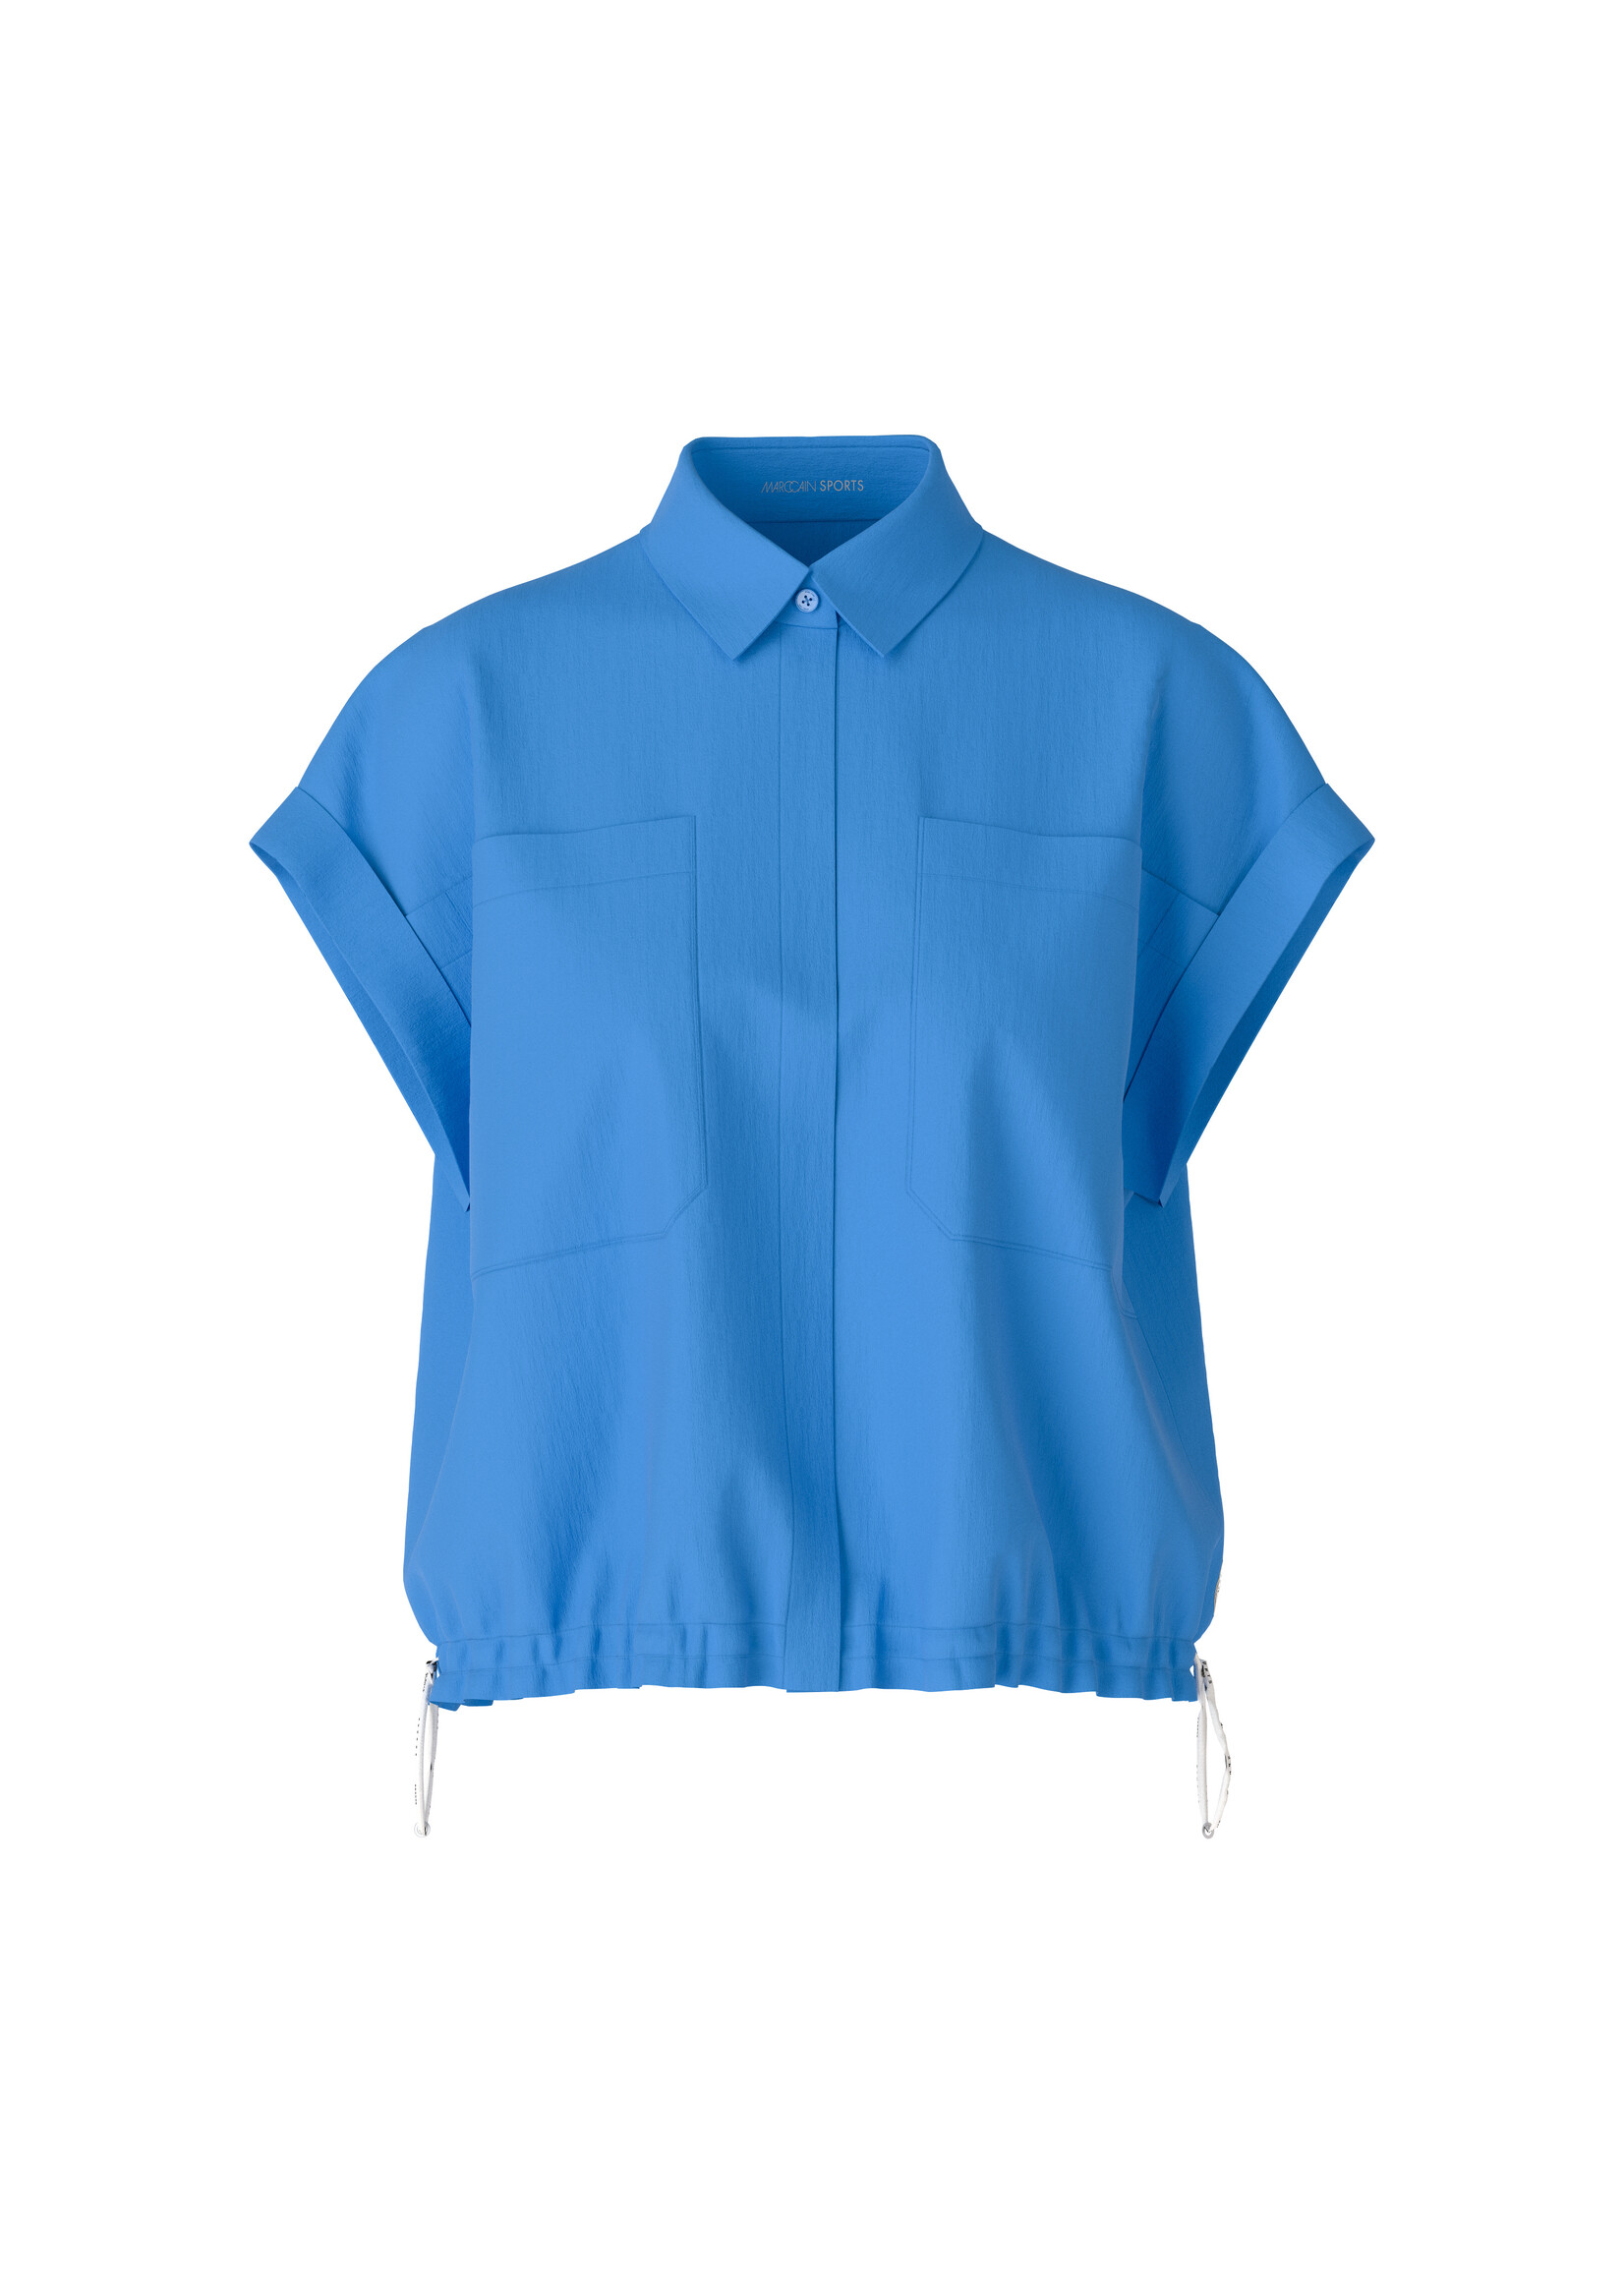 Marccain Sports Blouse WS 51.23 W48 363